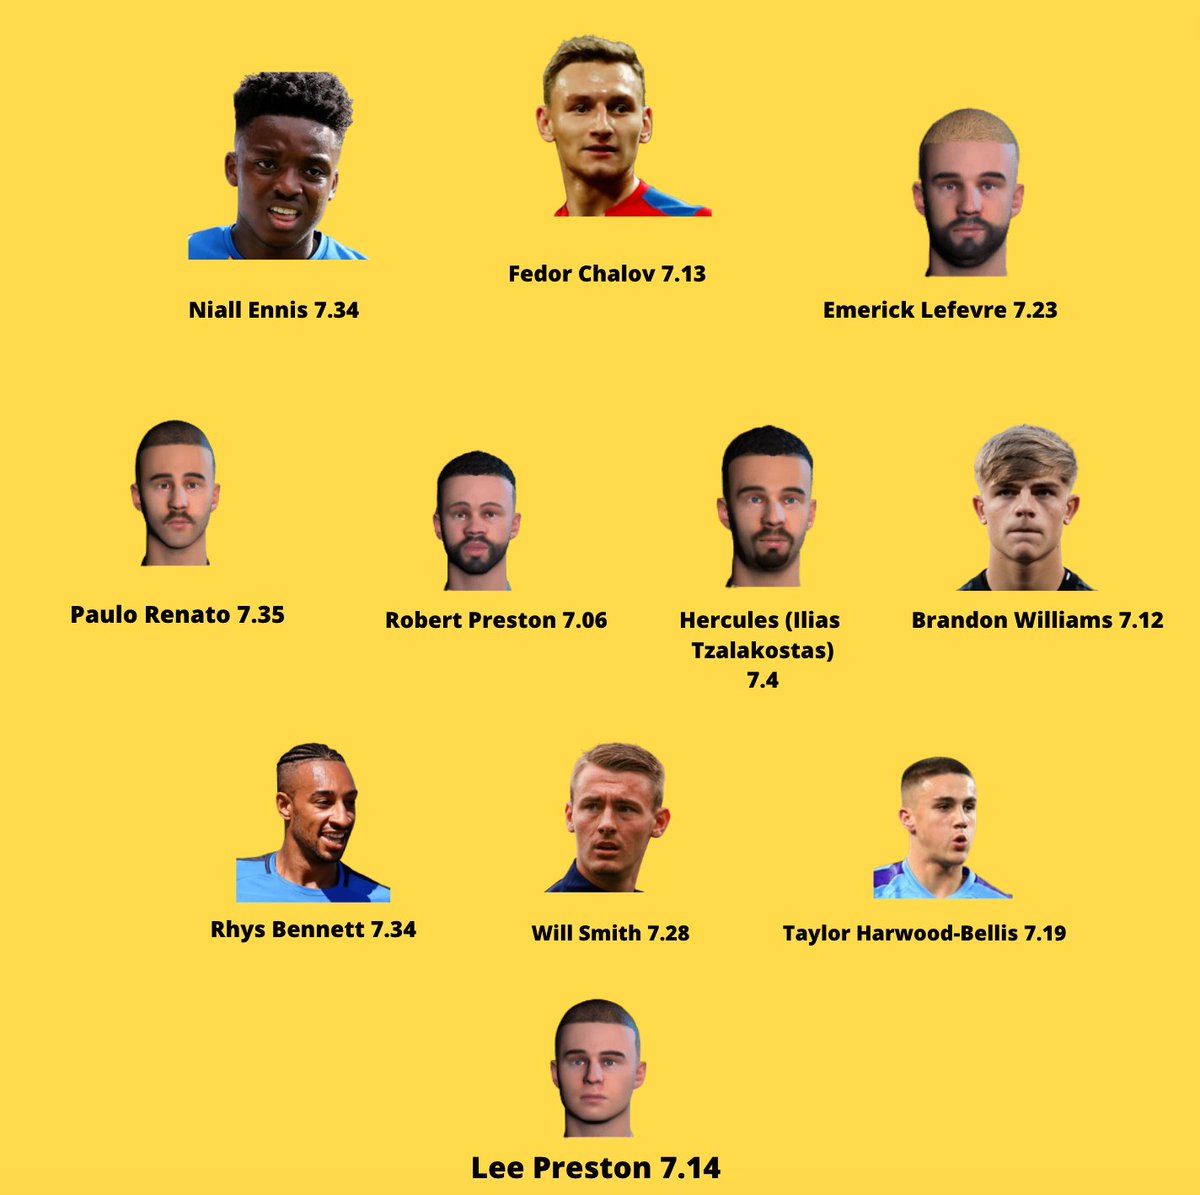 The dream XI so far. My best central midfielder has a highest average rating of 7.06, so I stuck Hercules there as well. Tbf he's so good I reckon he'd do a fine job